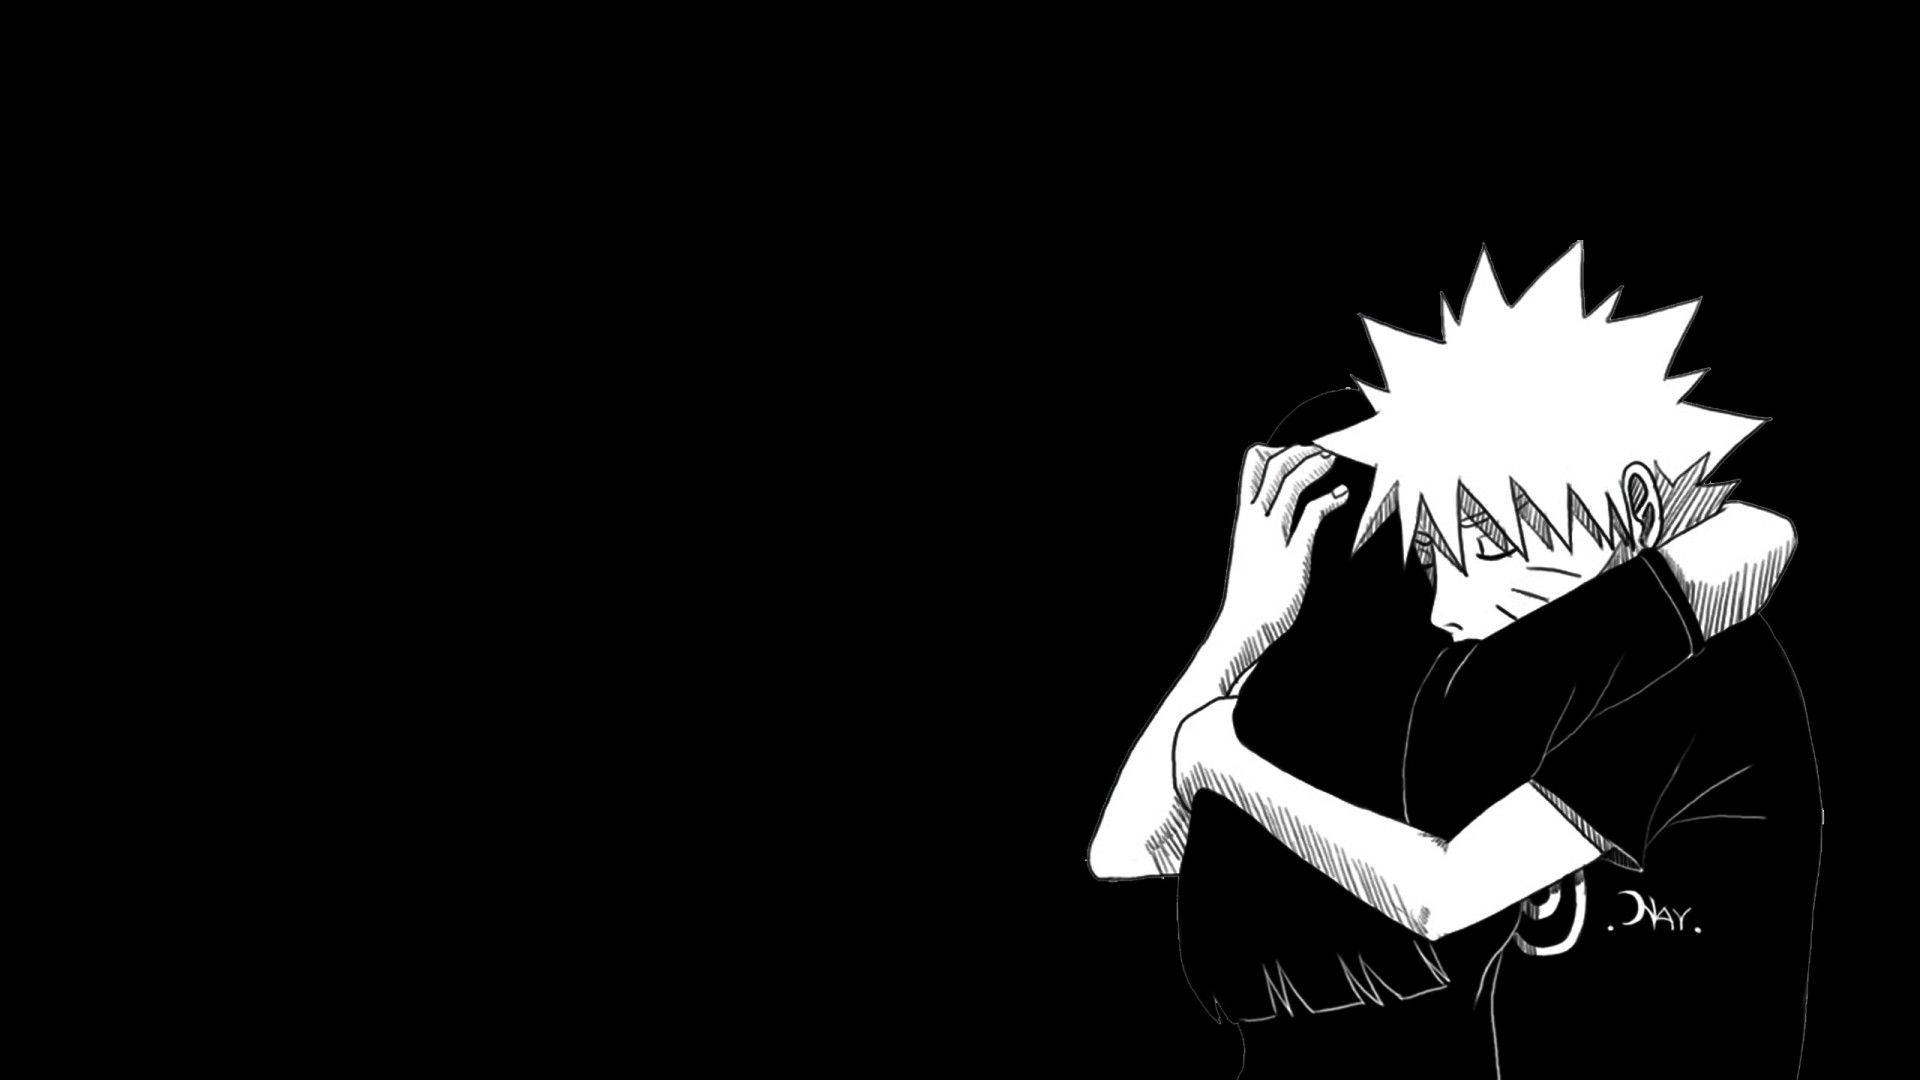 1920x1080 Beginning to become weary of viewing Naruto as a result of those irrelevant scenes? #naruto #narutoshippuden &acirc;&#128;&brvbar; | Anime wallpaper iphone, Dark anime, Anime wallpaper